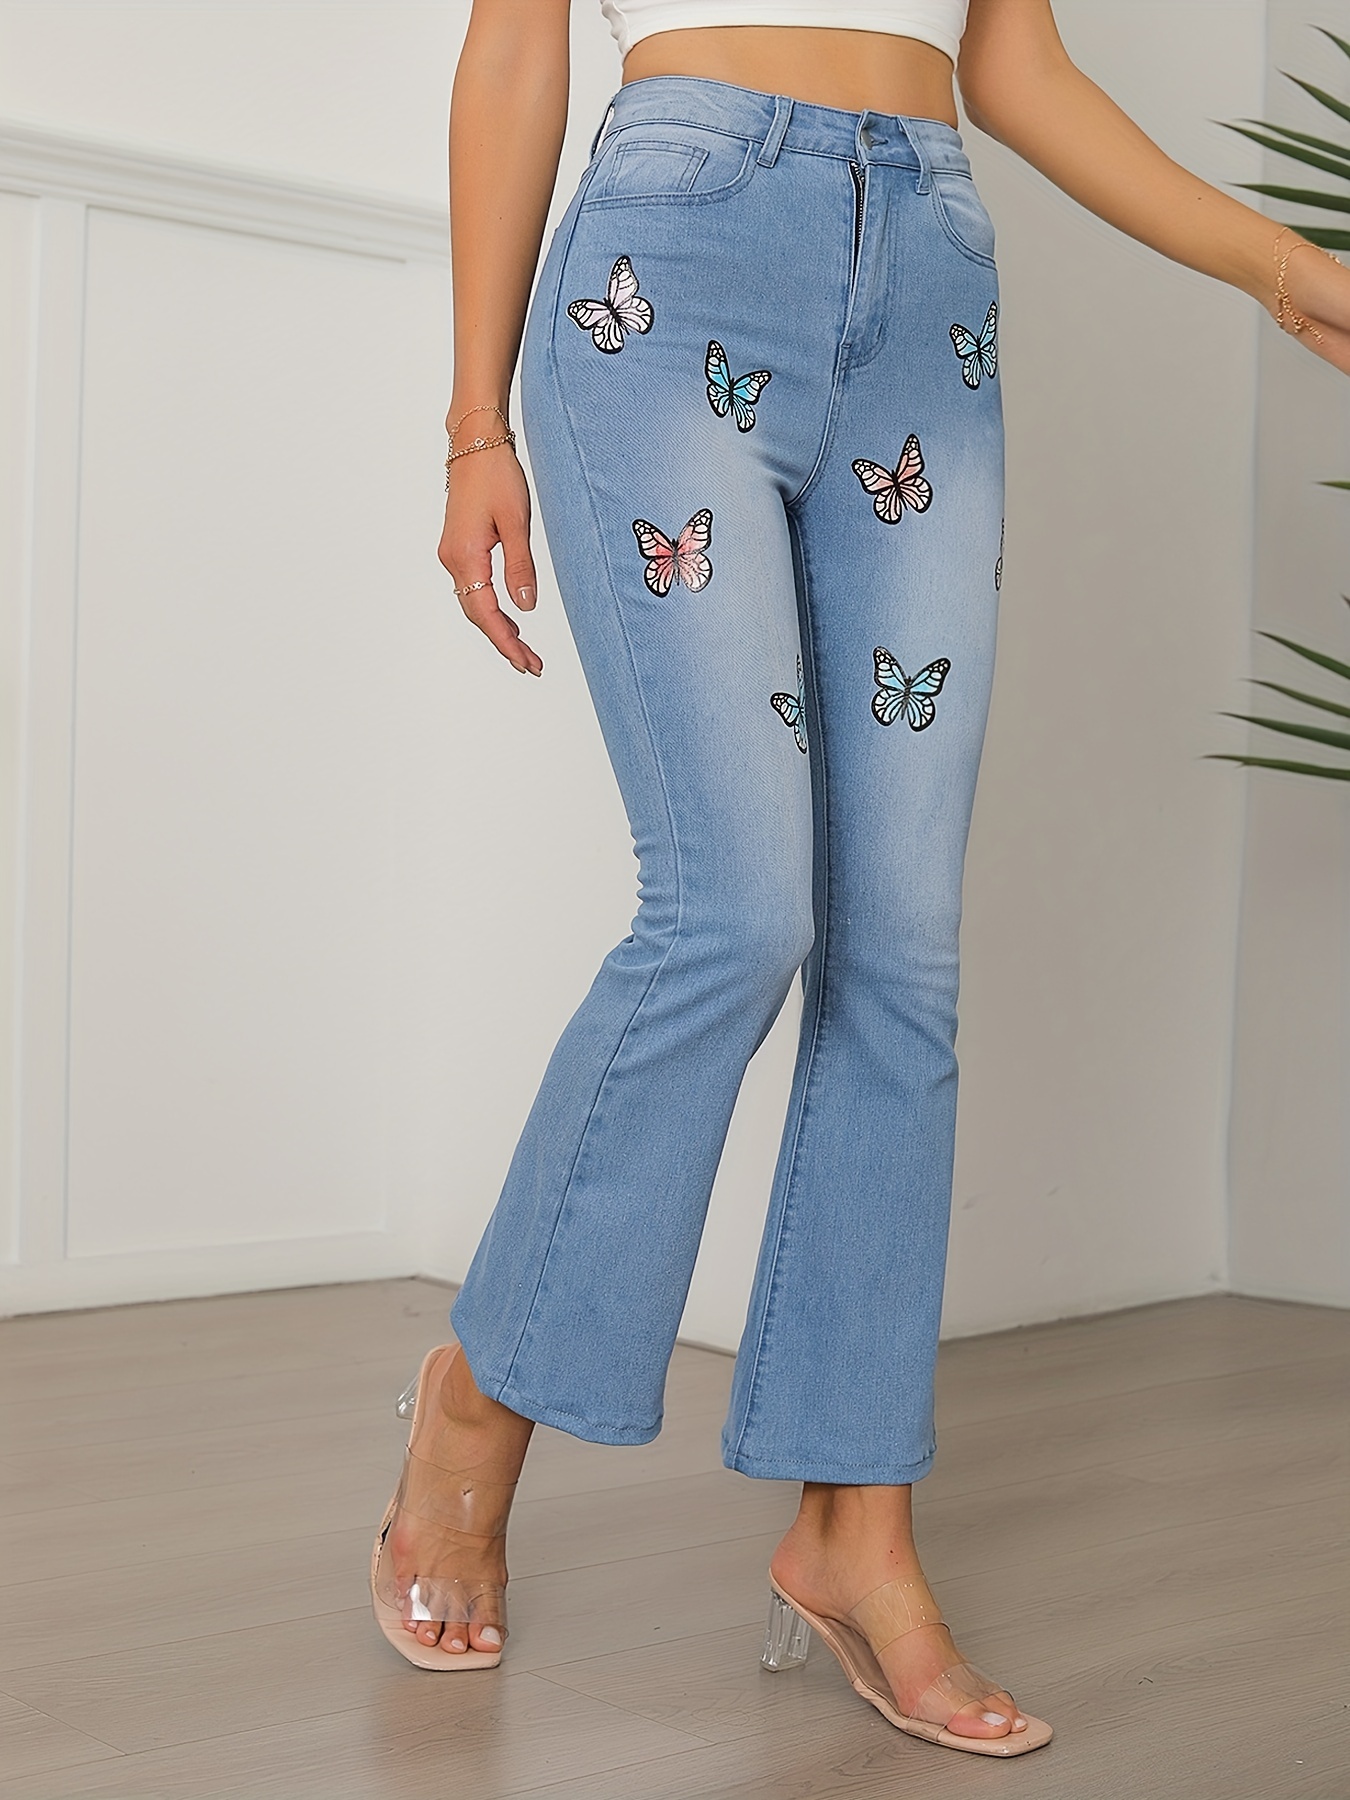 HI-RISE TRF JEANS WITH BUTTERFLIES - Blue